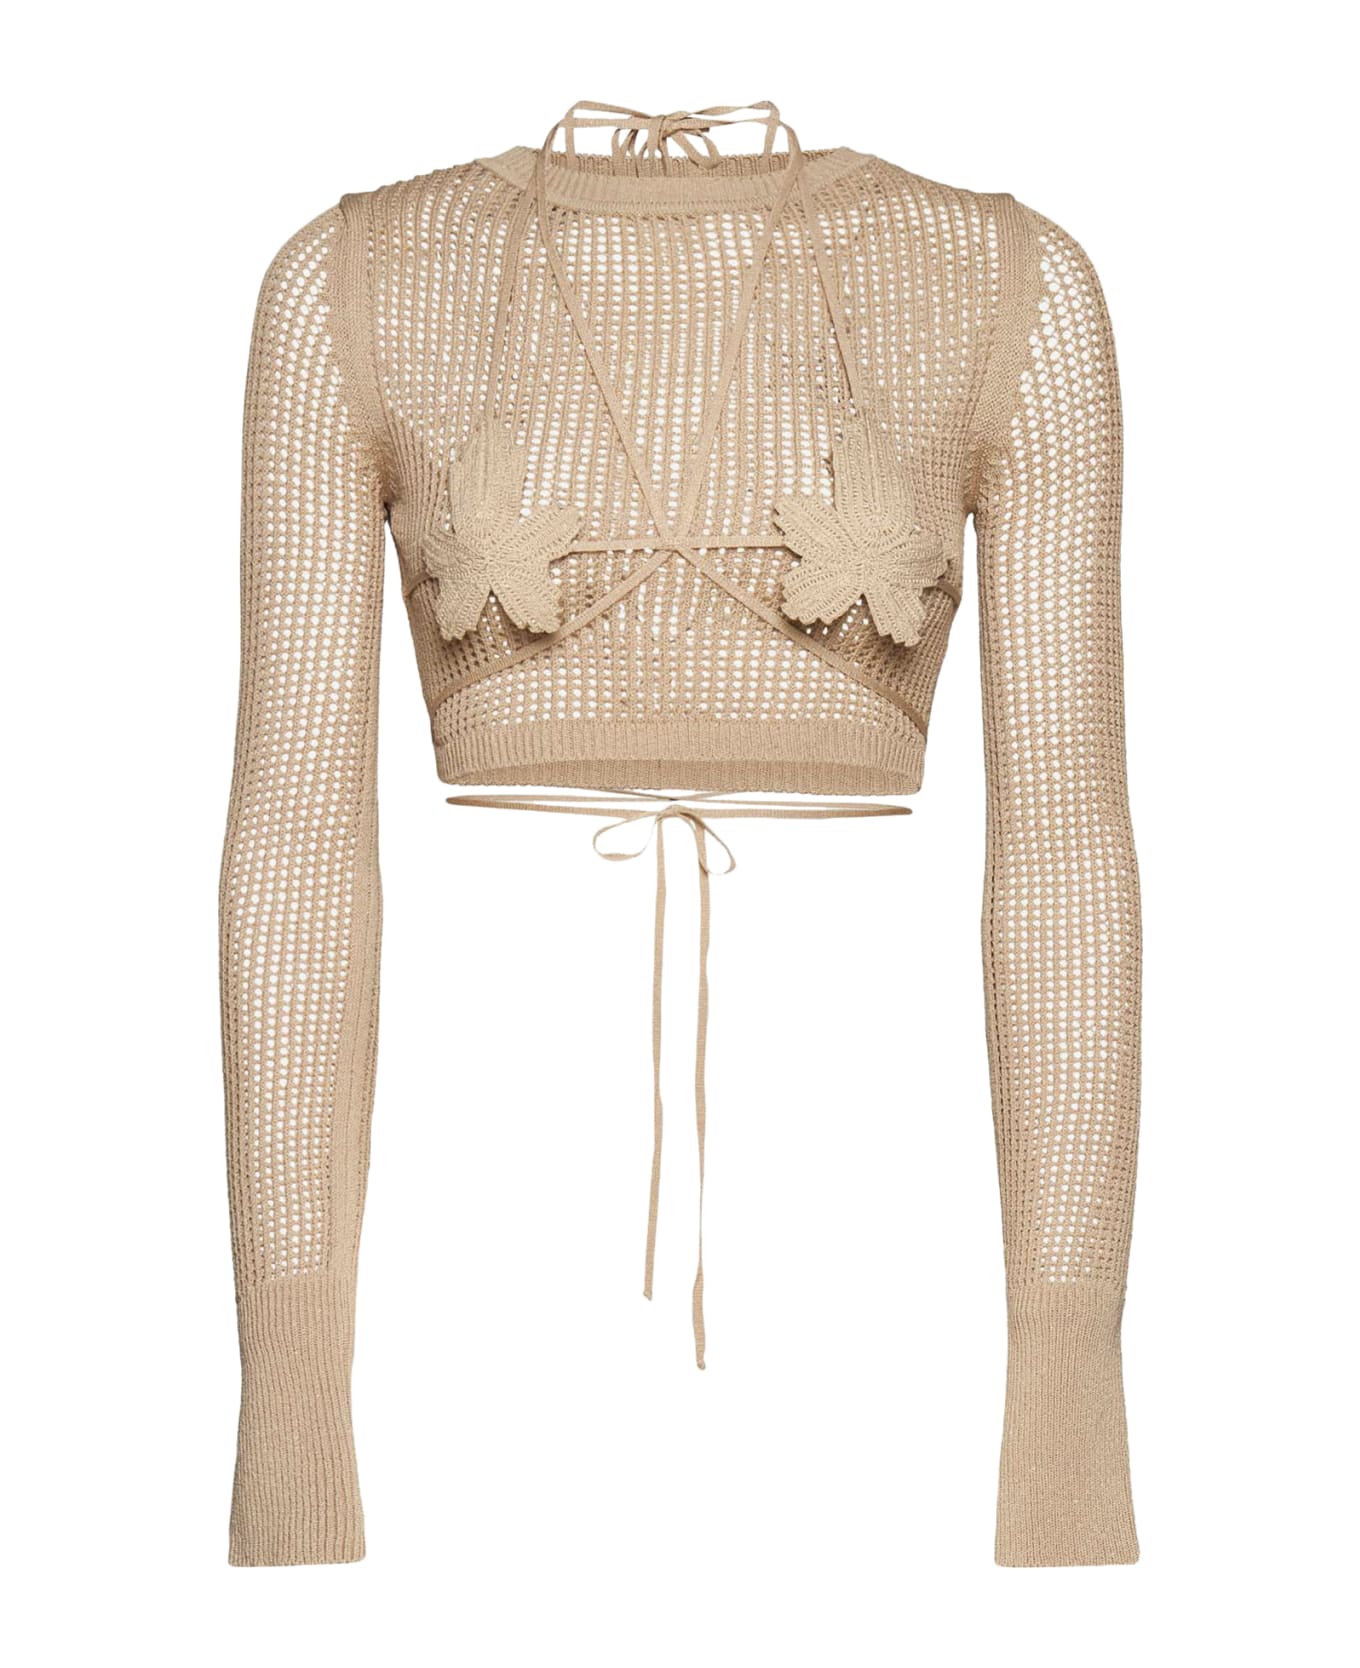 ANDREĀDAMO Fishnet Knit Crop Top With Cut-out And F - Nude